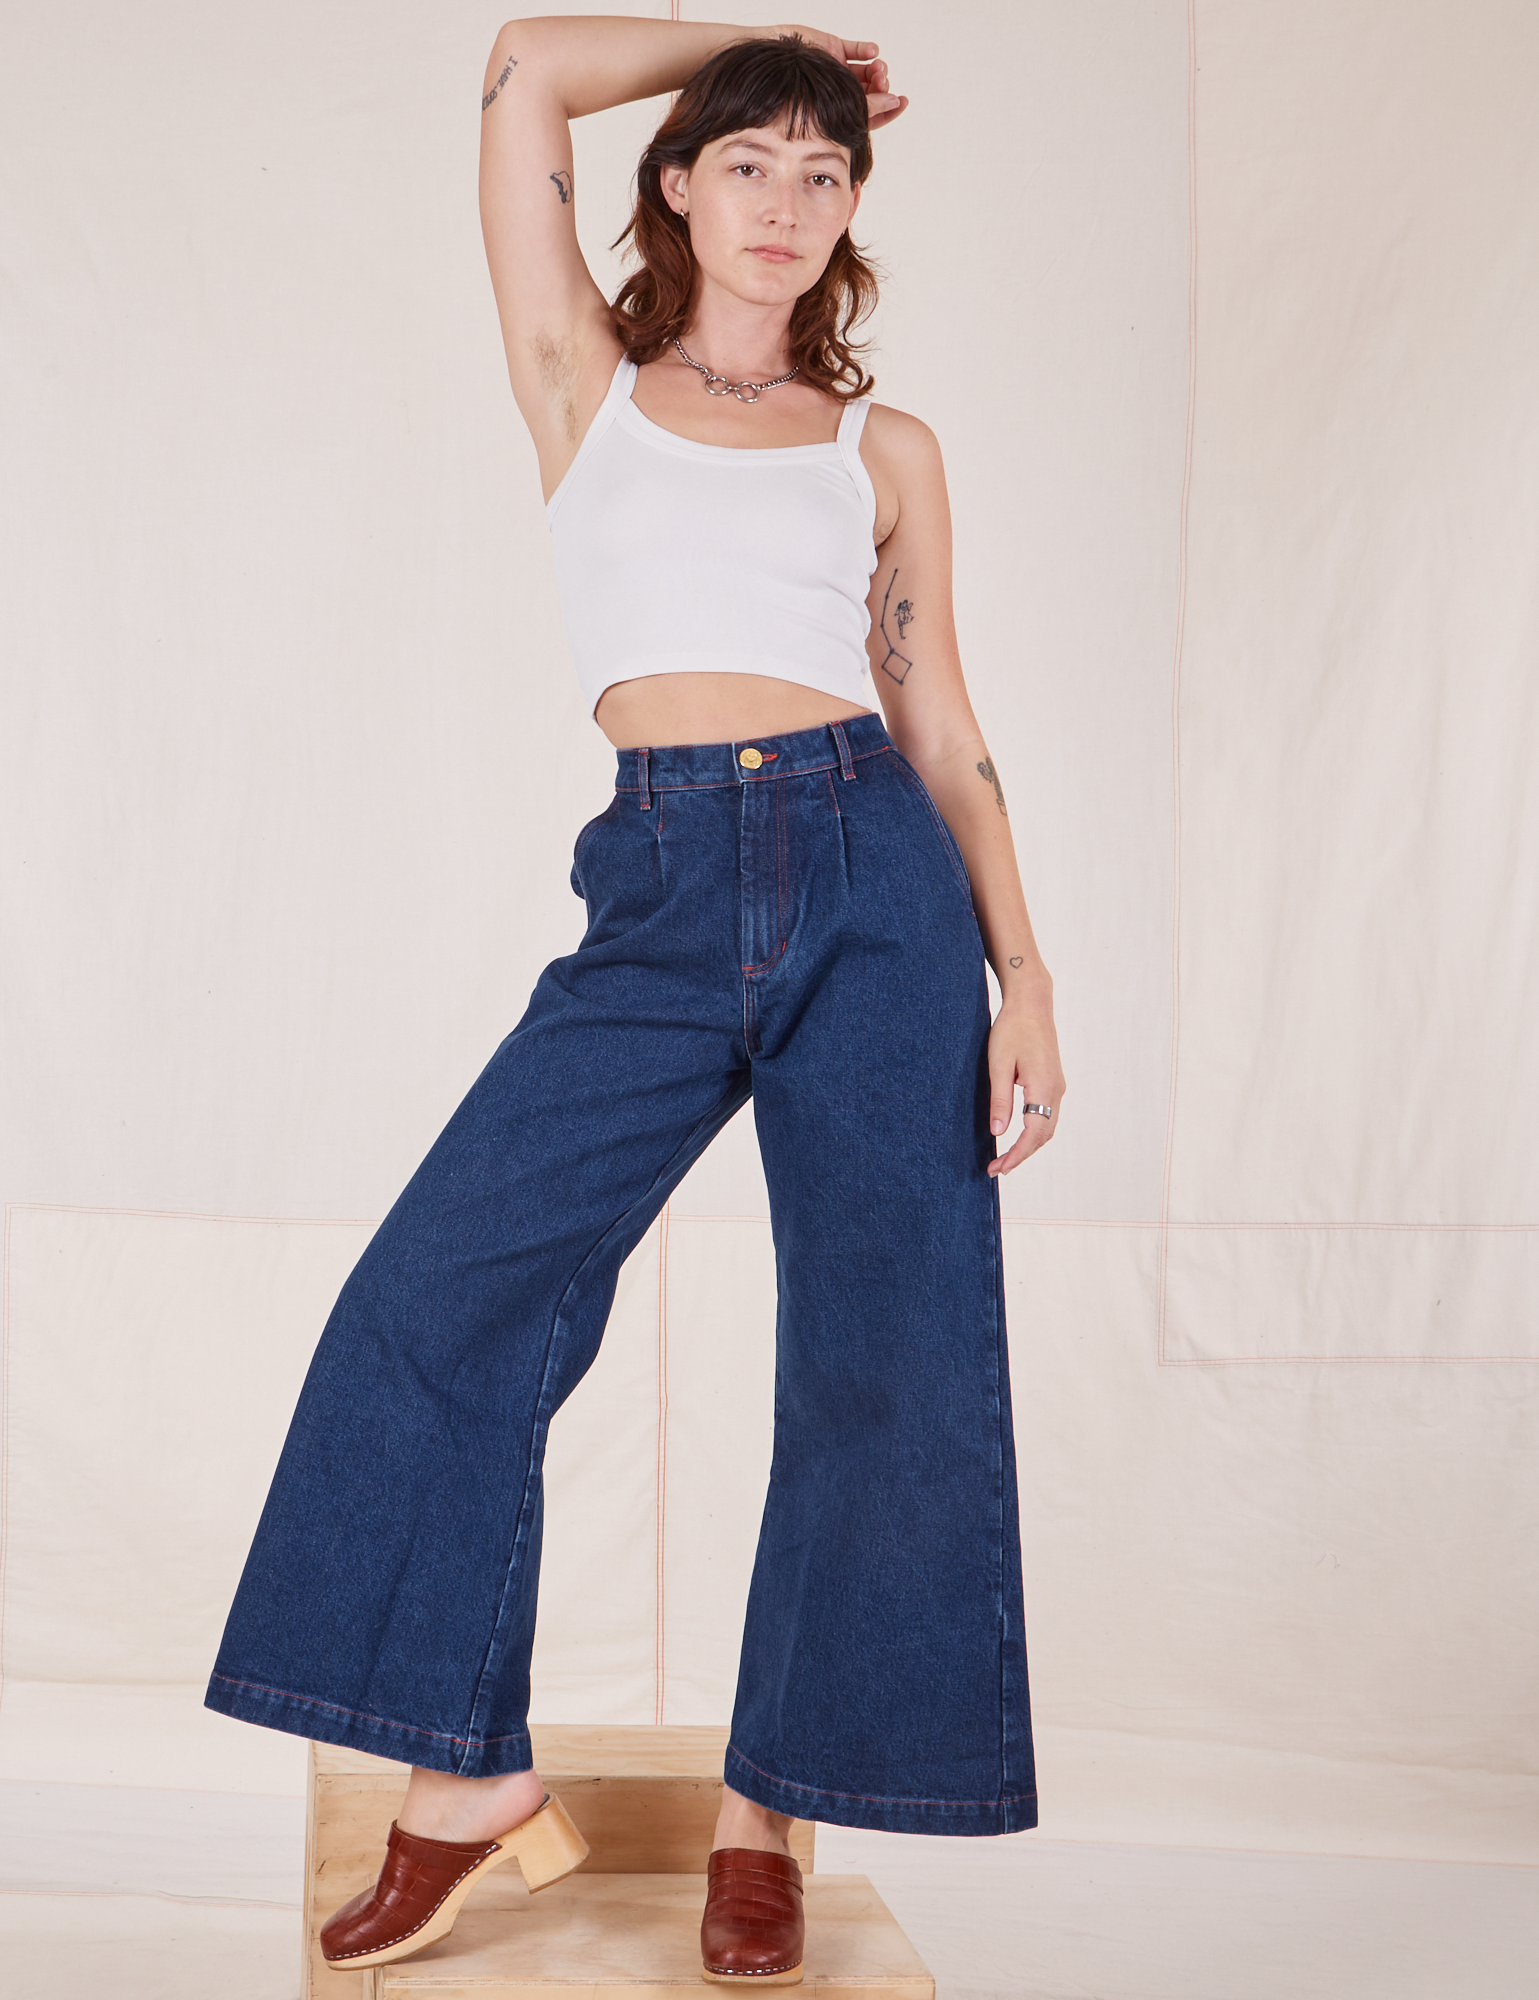 Alex is 5&#39;8&quot; and wearing XXS Indigo Wide Leg Trousers in Dark Wash paired with vintage off-white Cami